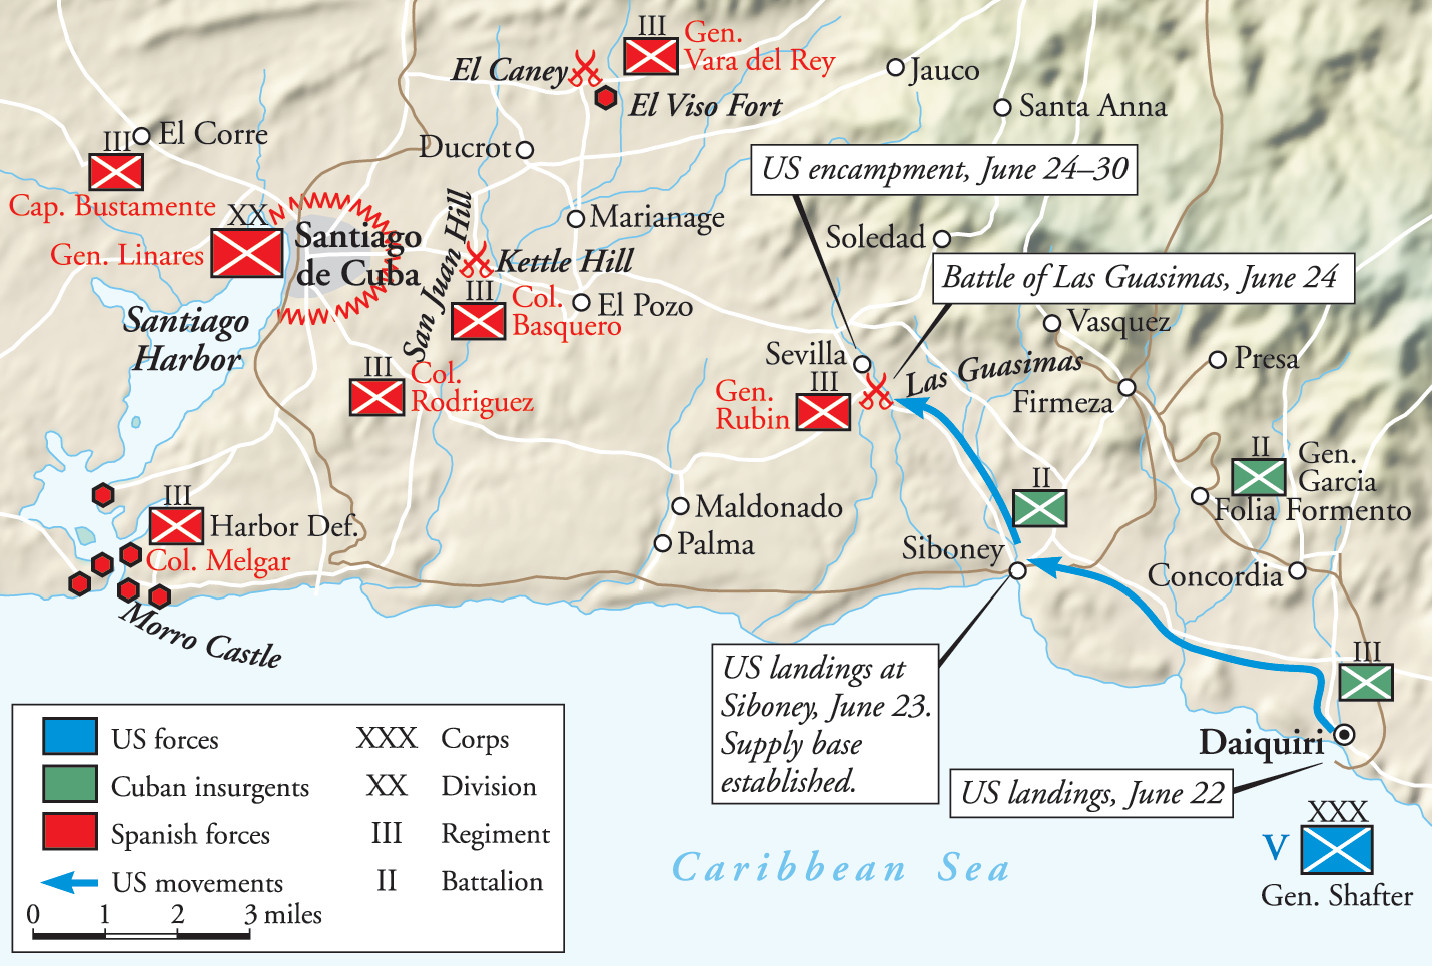 The American Army landed at Daiquiri, on the southern coast of Cuba, then moved west toward Santiago, where the main Spanish forces were centered.